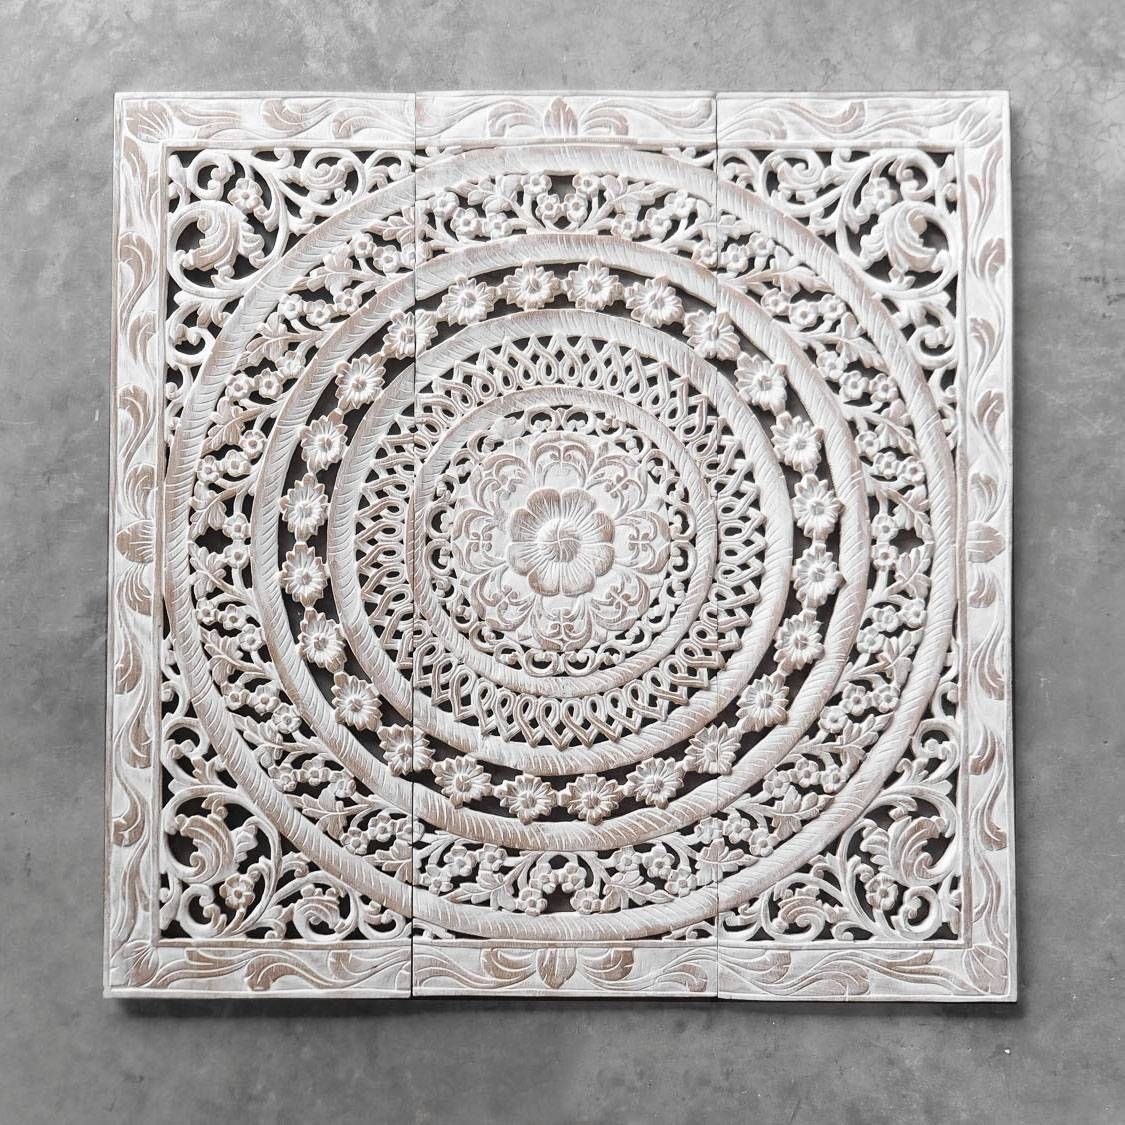 Wood Carved Wall Art | Himalayantrexplorers For Current White Wooden Wall Art (View 3 of 20)